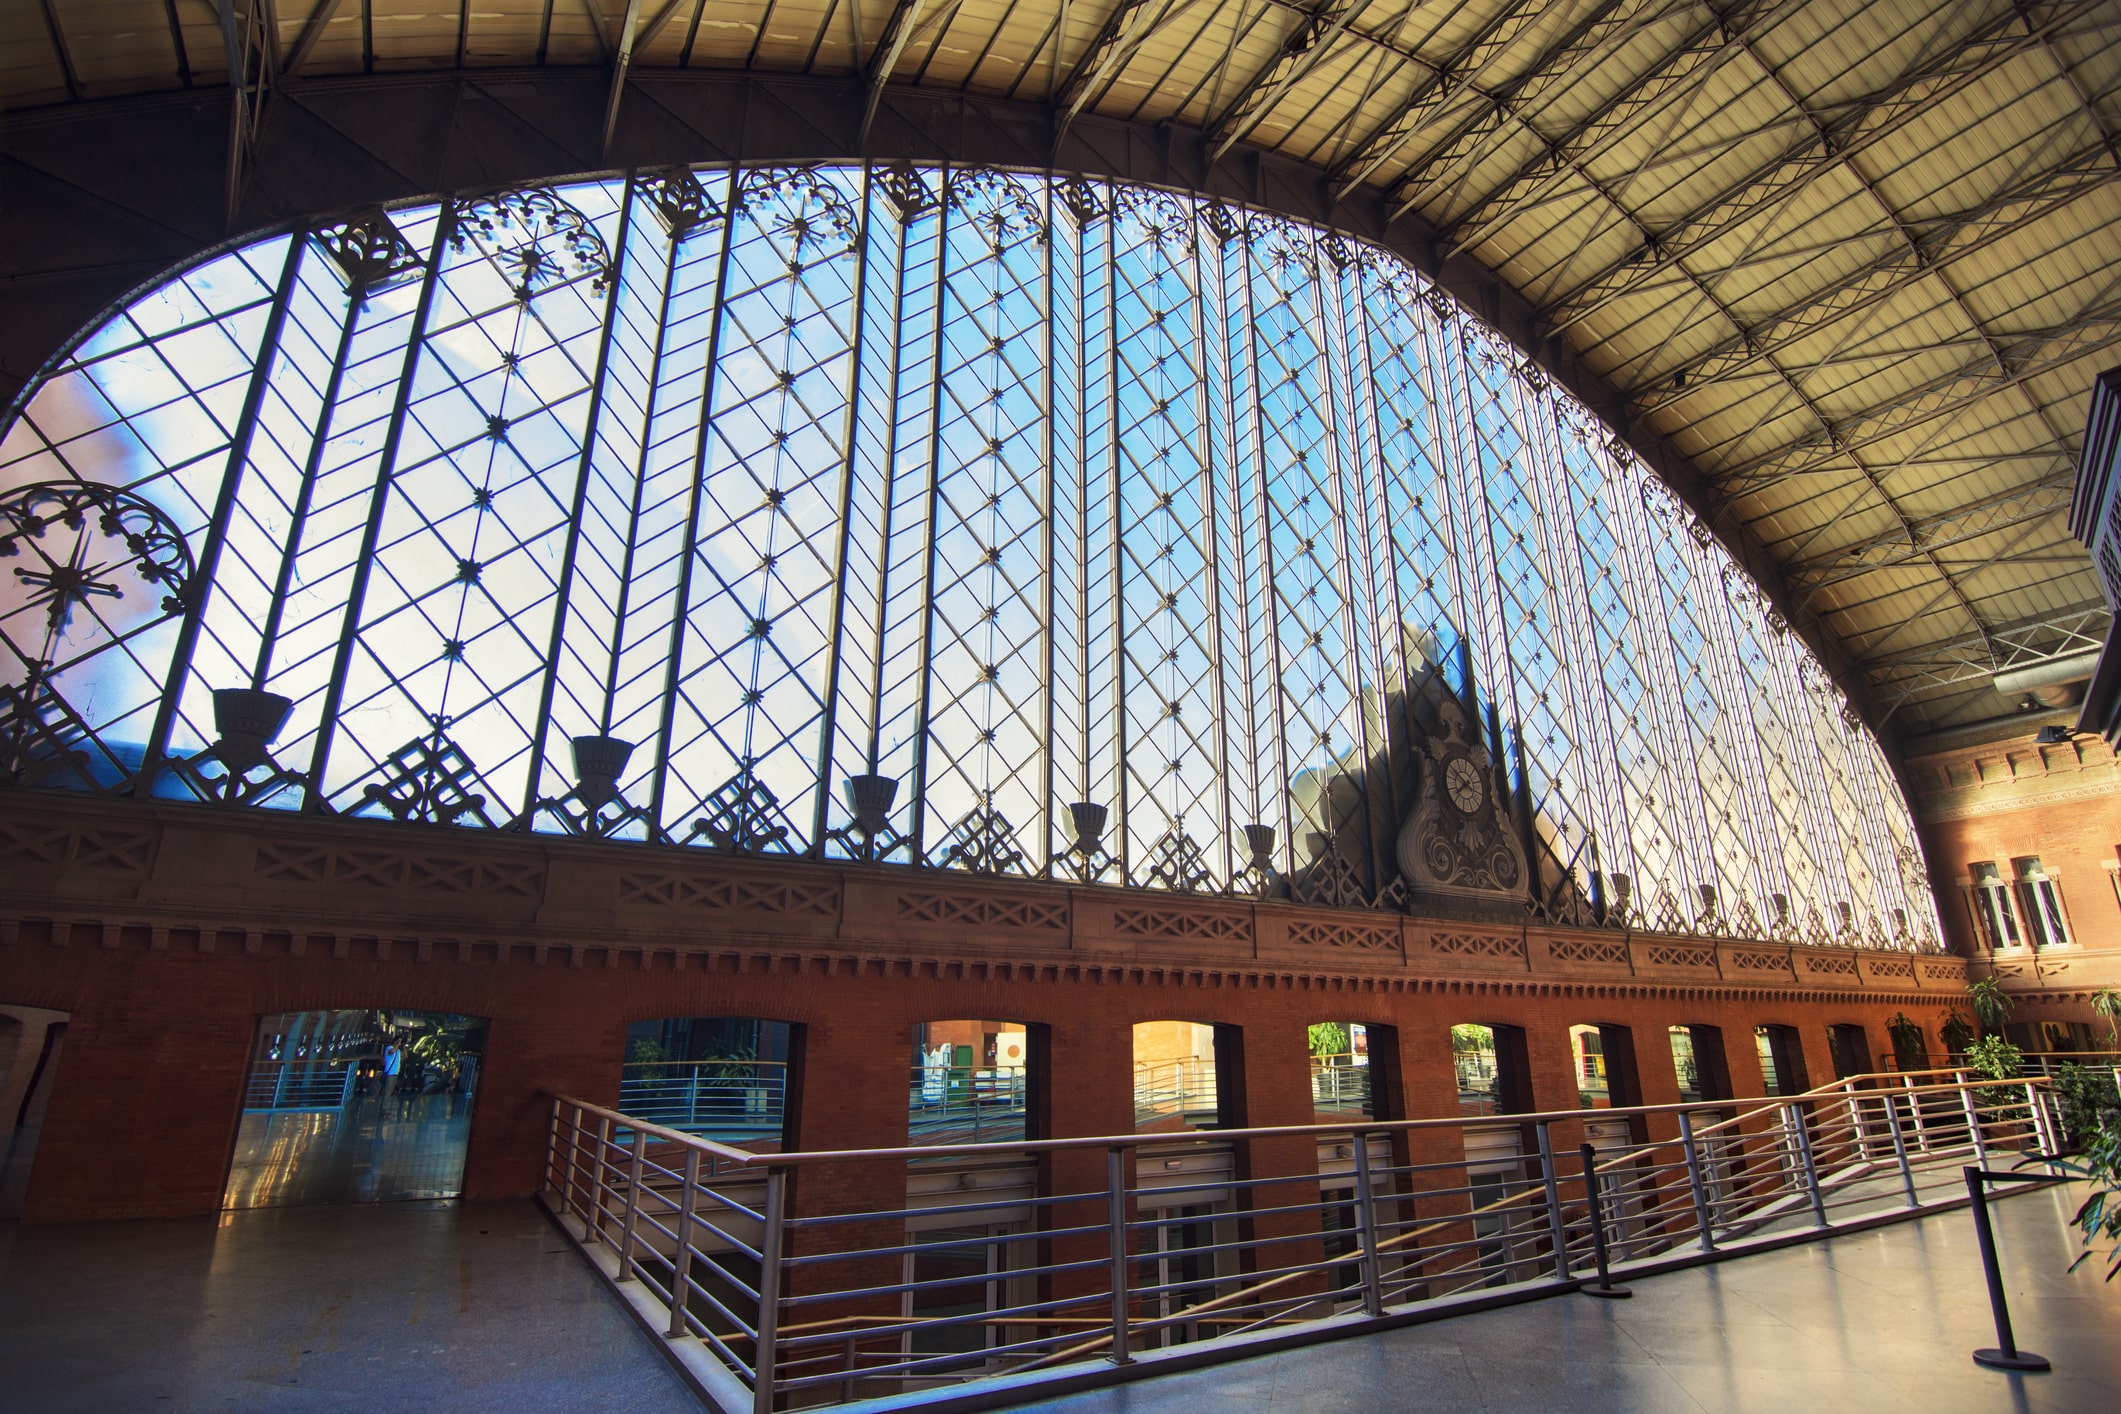 Looking our the large glass and wrought iron window at the front of Atocha train station in Madrid.